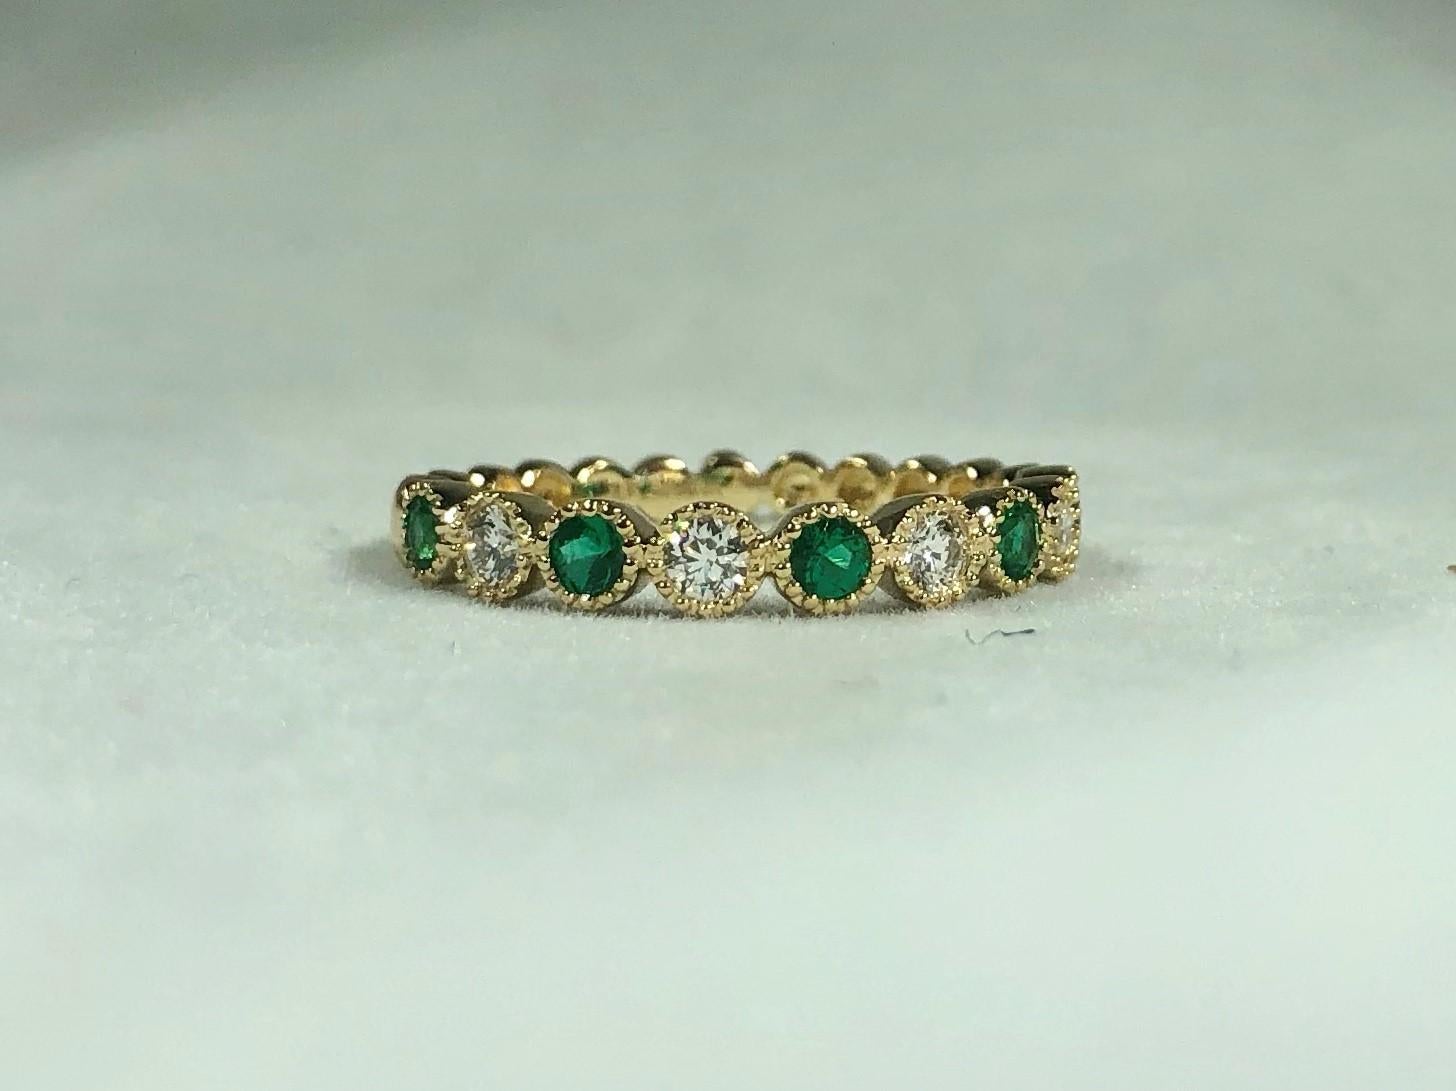 Spark Creations 18 Kt Diamond and Emerald Stacking Band. This Spark Creation is created in 18 kt yellow gold weighing,2.3 grams. This ring is adorned with 5 round Emeralds 0.25 carat total weight, and 4 Round diamonds 0.20 carat total weight.